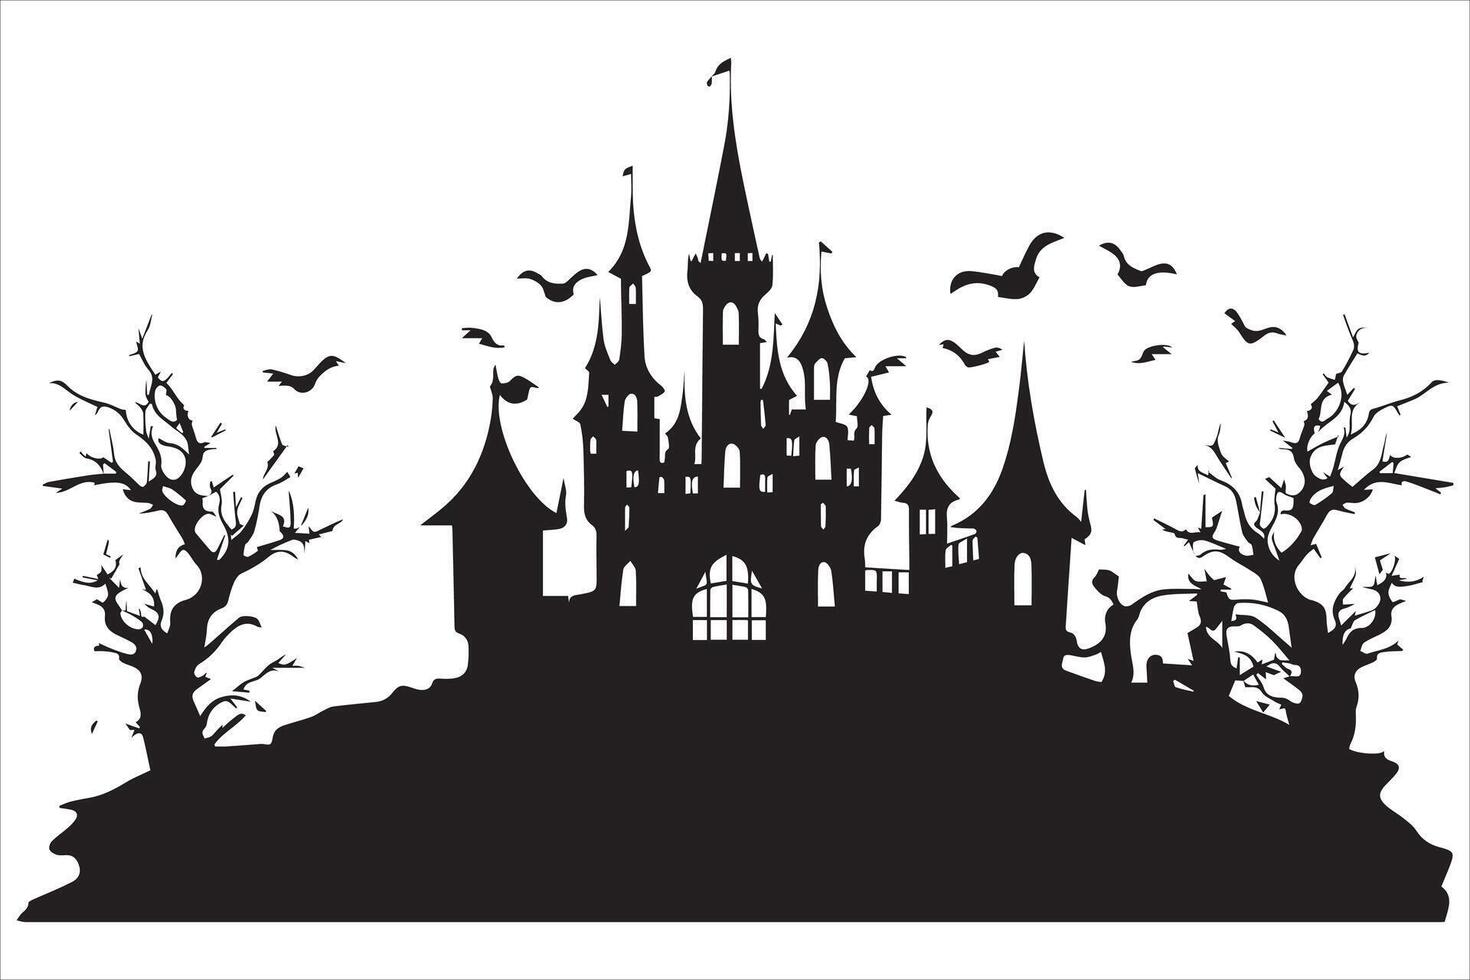 Halloween witch house silhouette vector